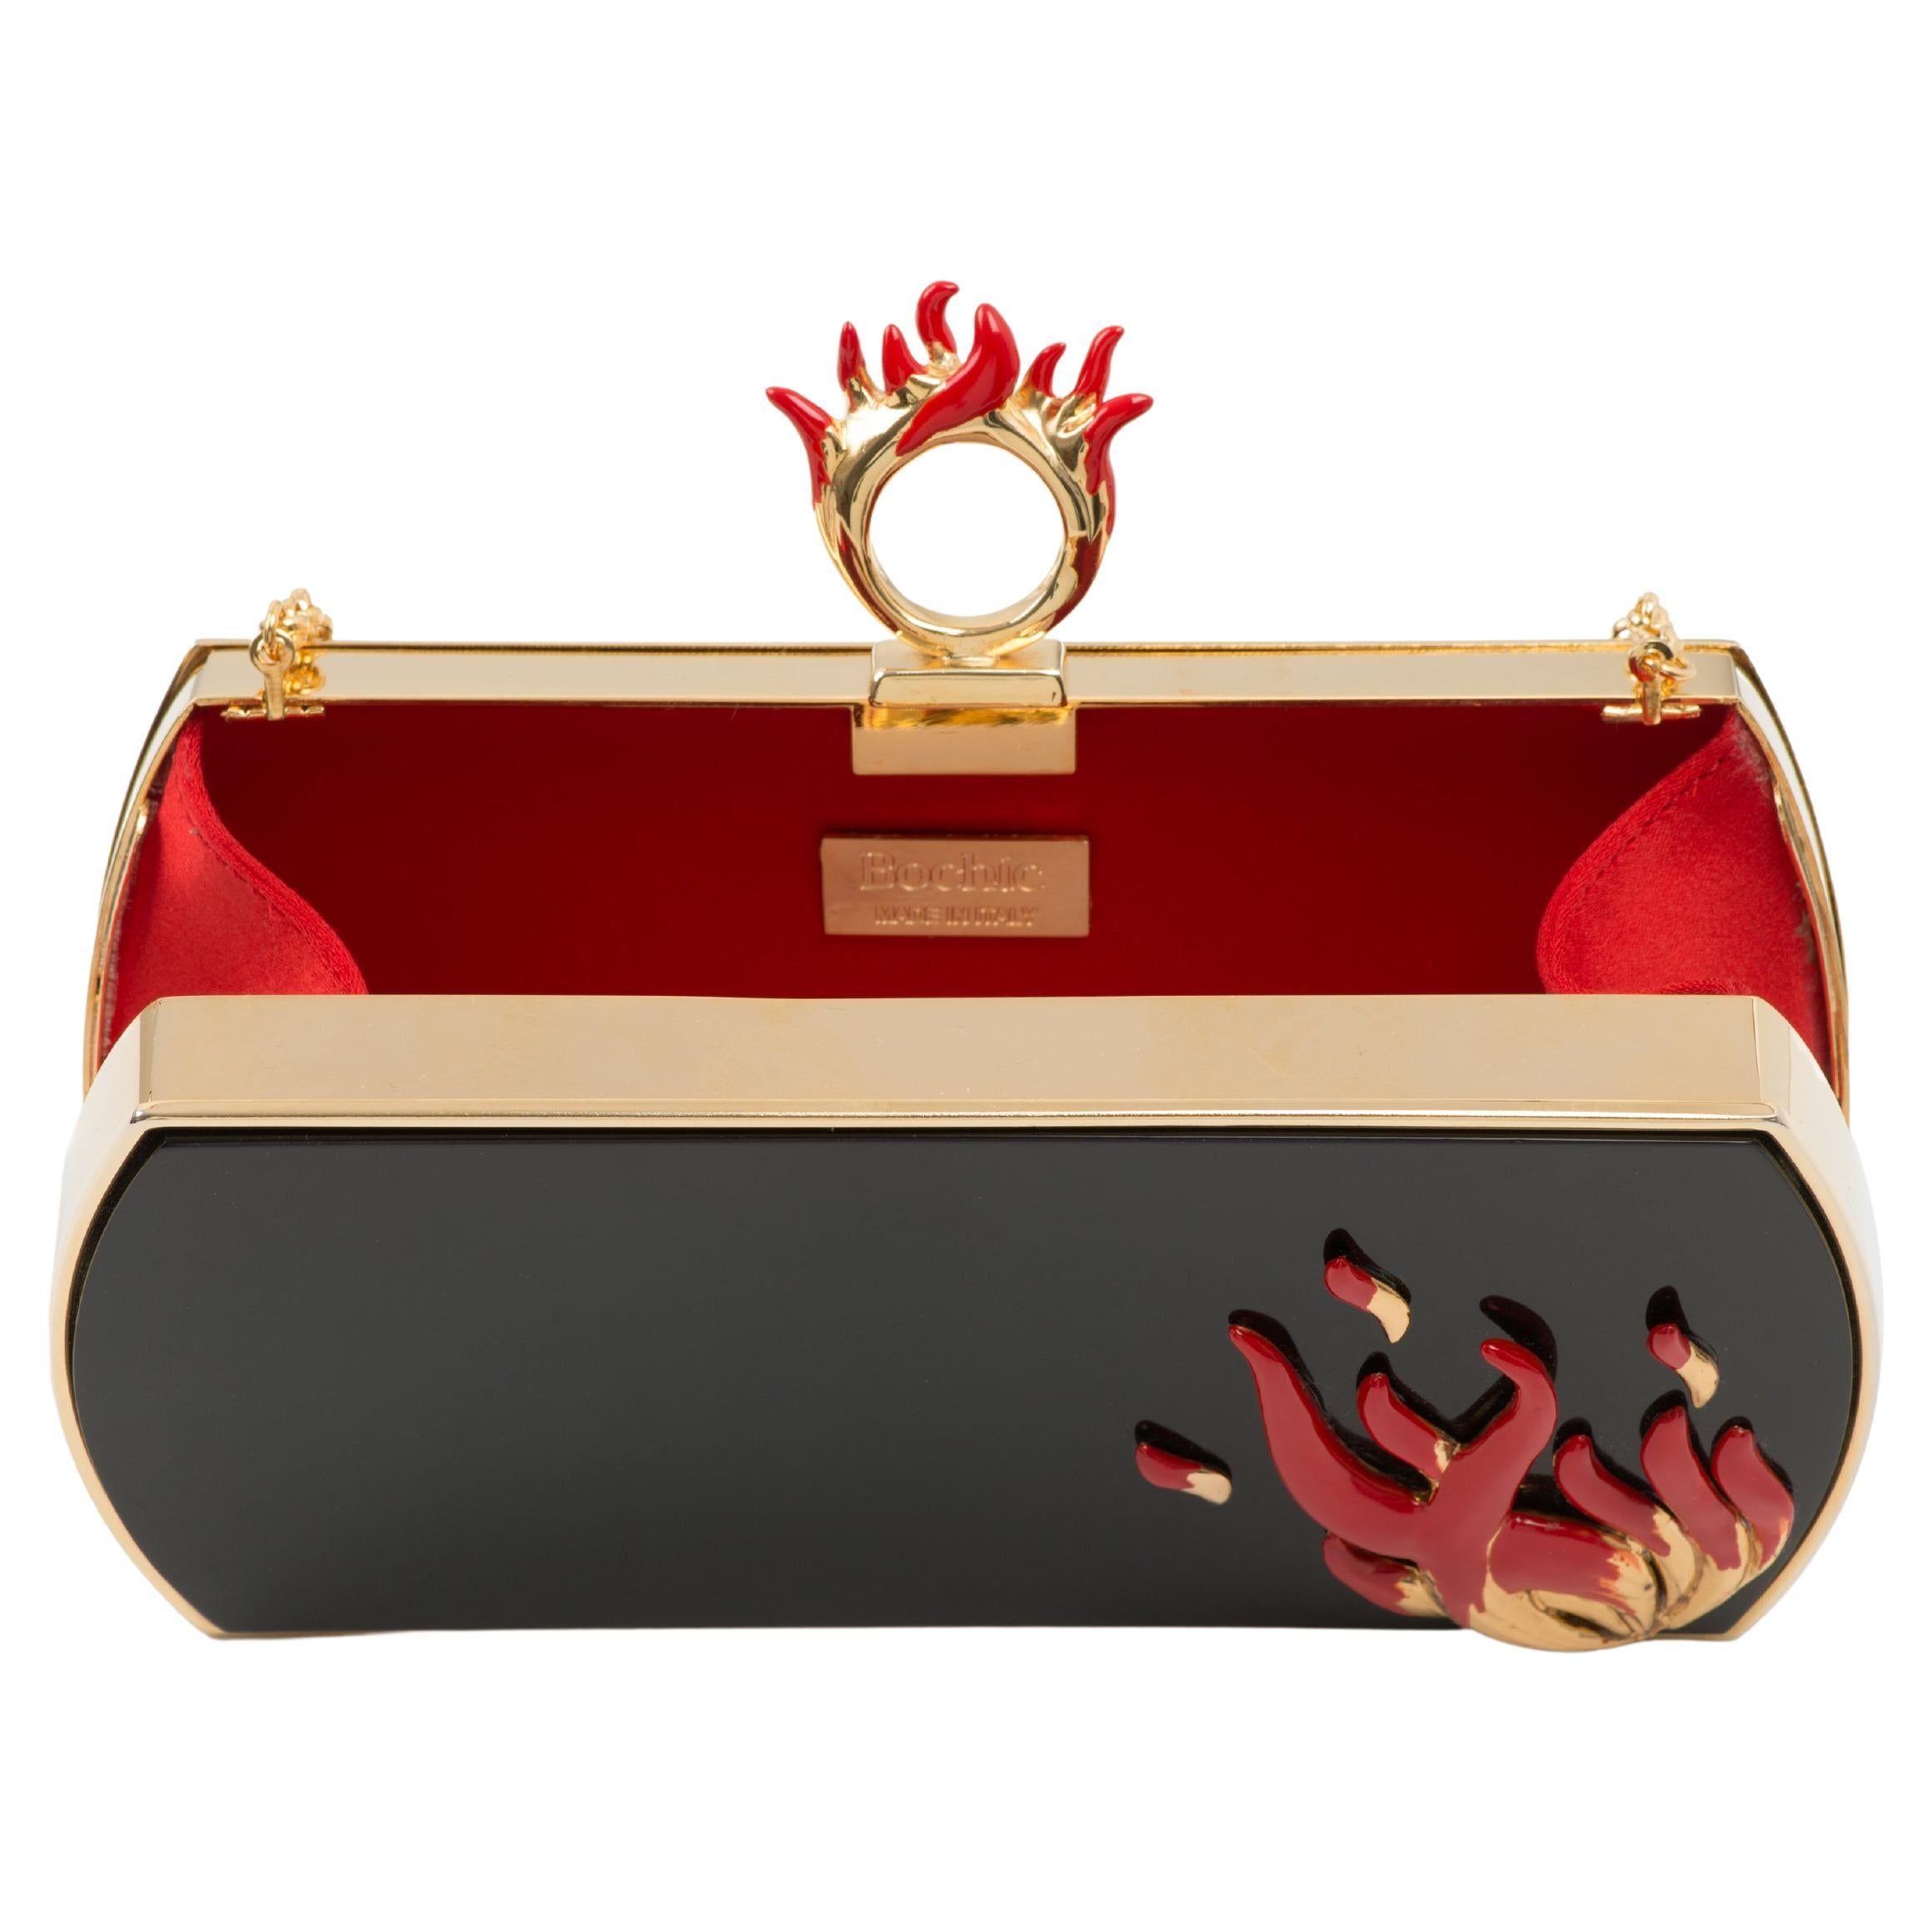 Bochic “Gilda” Collector Jeweled Limited Edition Clutch Made in Italy  For Sale